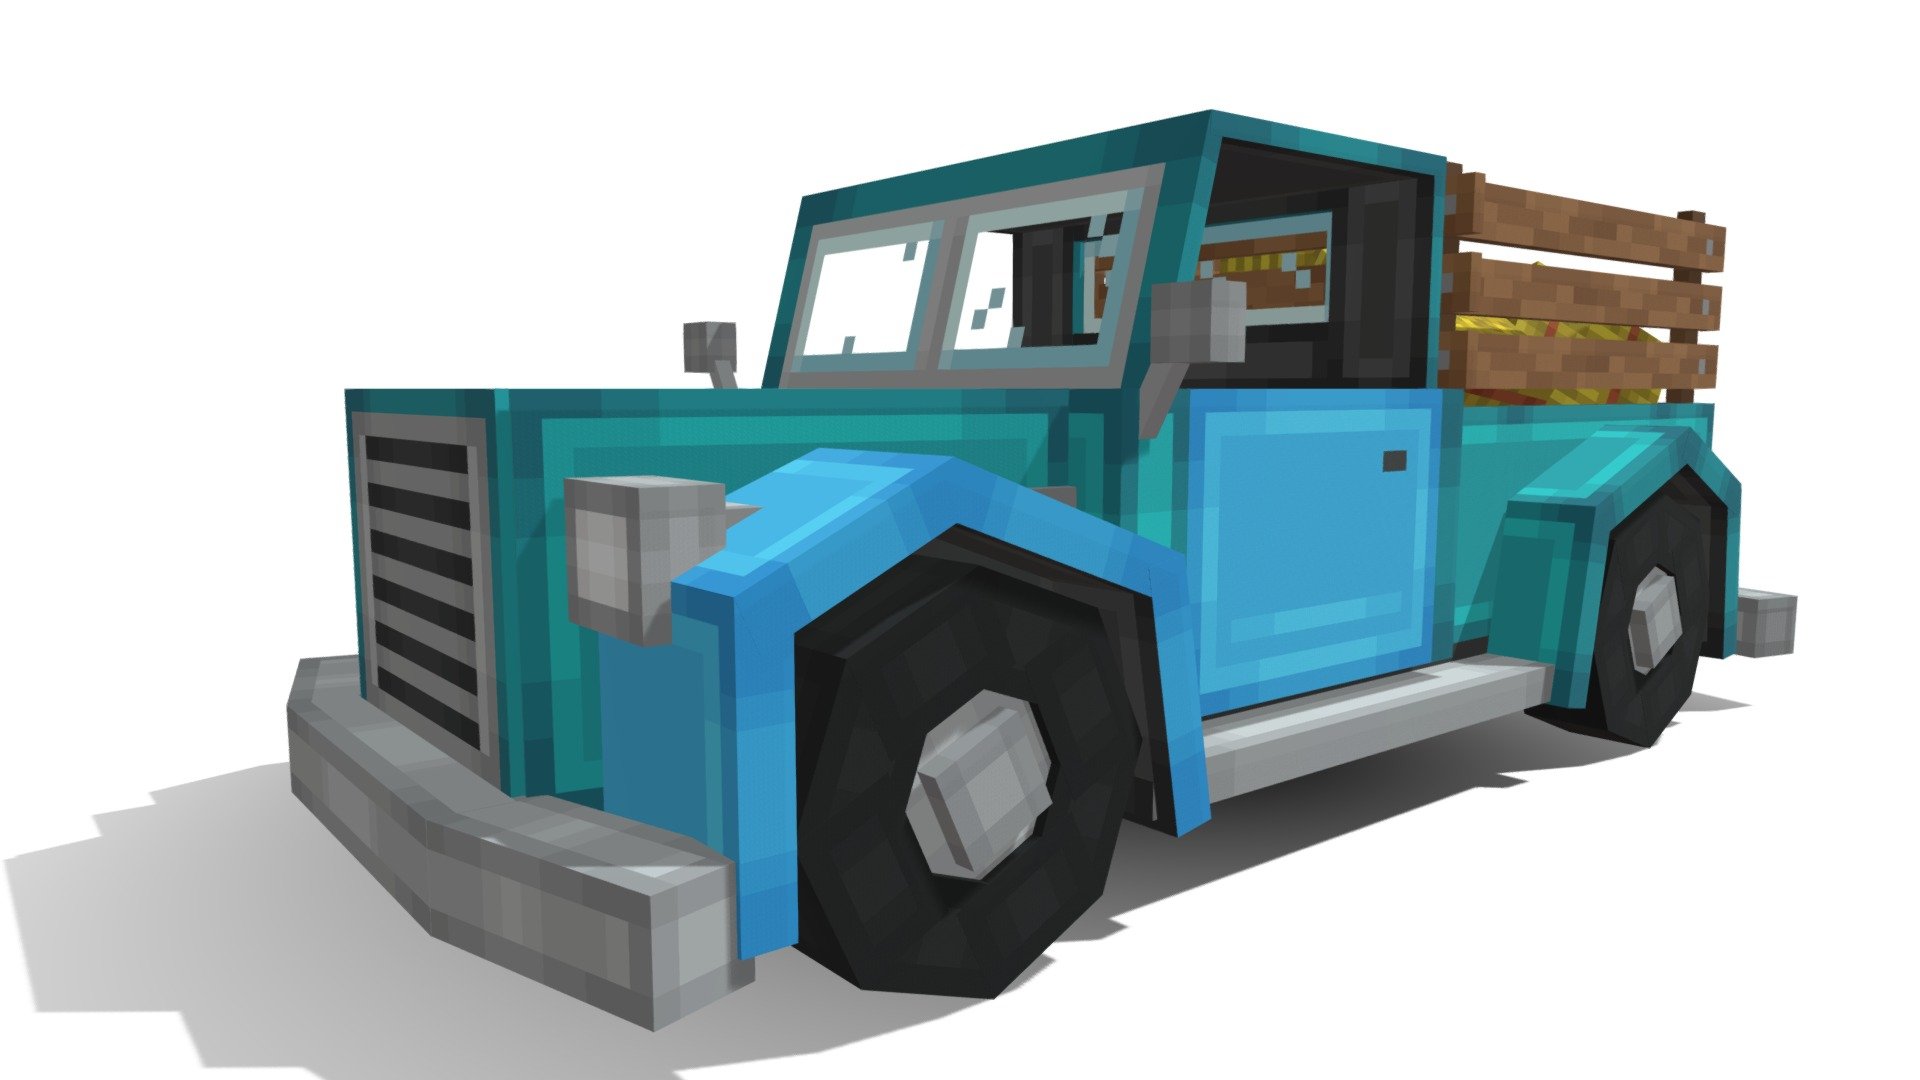 Farm truck hauling hay in Minecraft

Created by: https://twitter.com/Wartave - Farm Truck - 3D model by Octovon (@OctovonMC) 3d model